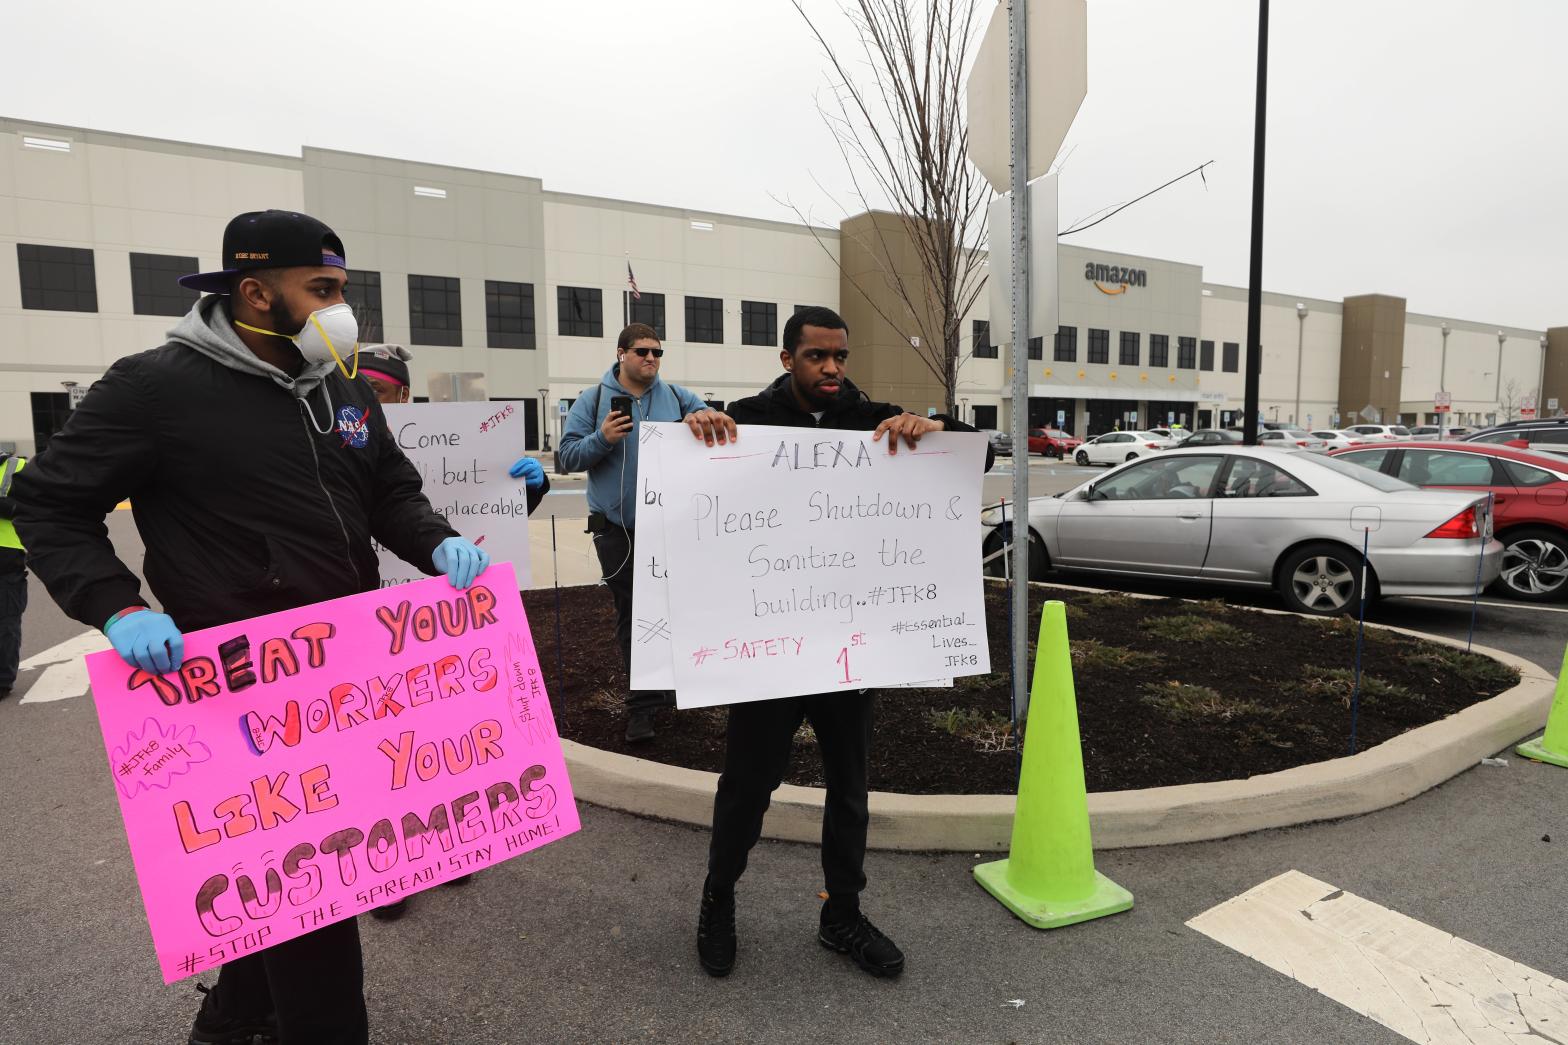 Protesters stand outside the Staten Island Amazon warehouse in March, 2020 protesting against what they said was lax sanitation during the height of Covid-19. (Photo: Spencer Platt, Getty Images)